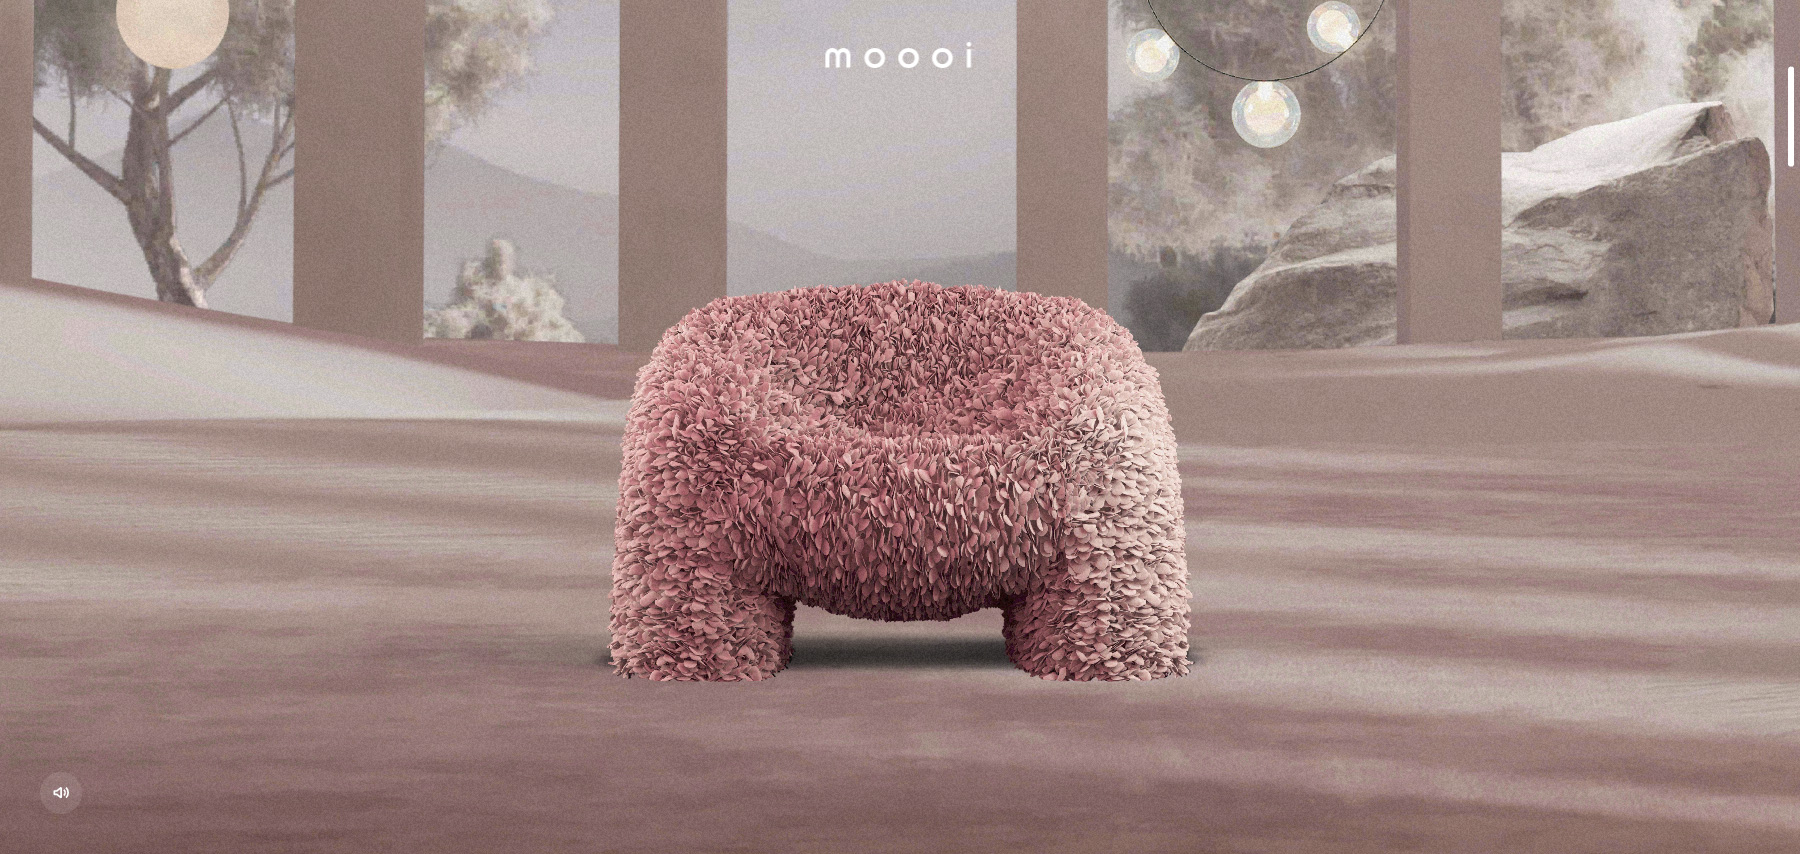 Moooi -  Beauty Blooms - Website of the Day